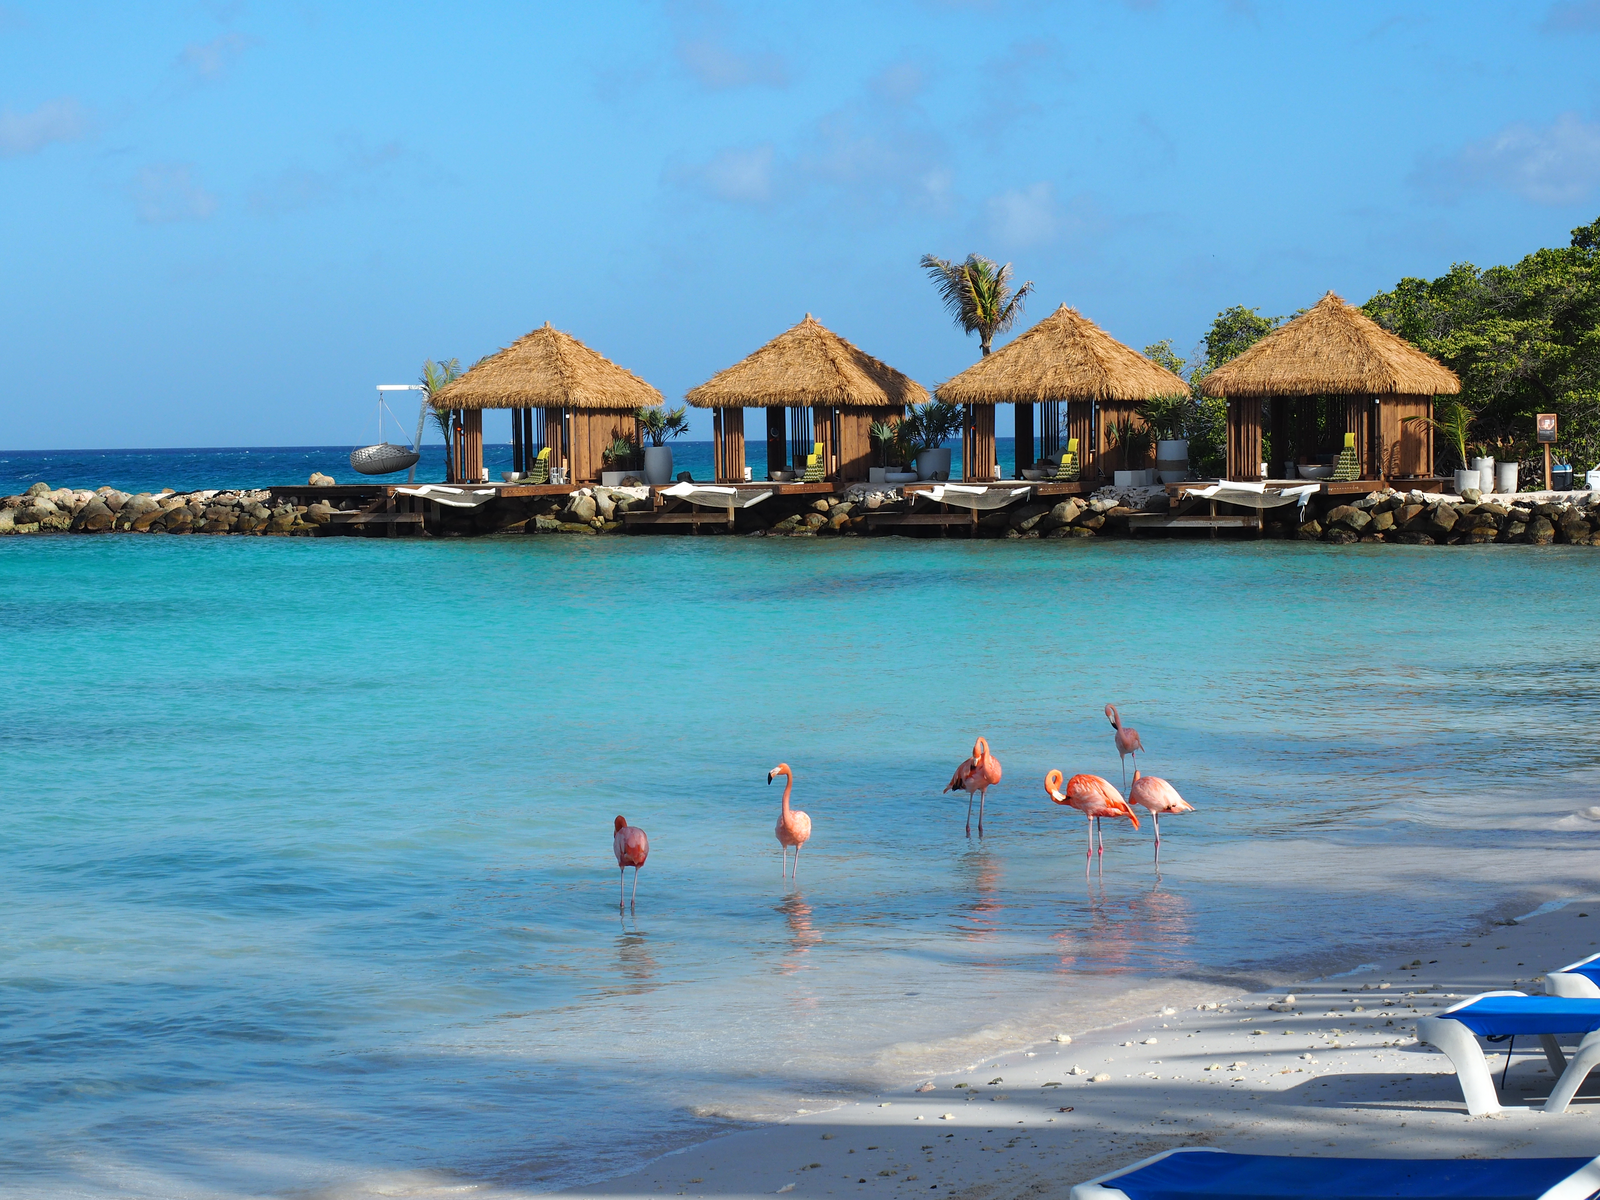 Six Flamingos walking on the calm waters of Renaissance Beach with its native-roofed cottages and a hammock, one of the best beaches in Aruba